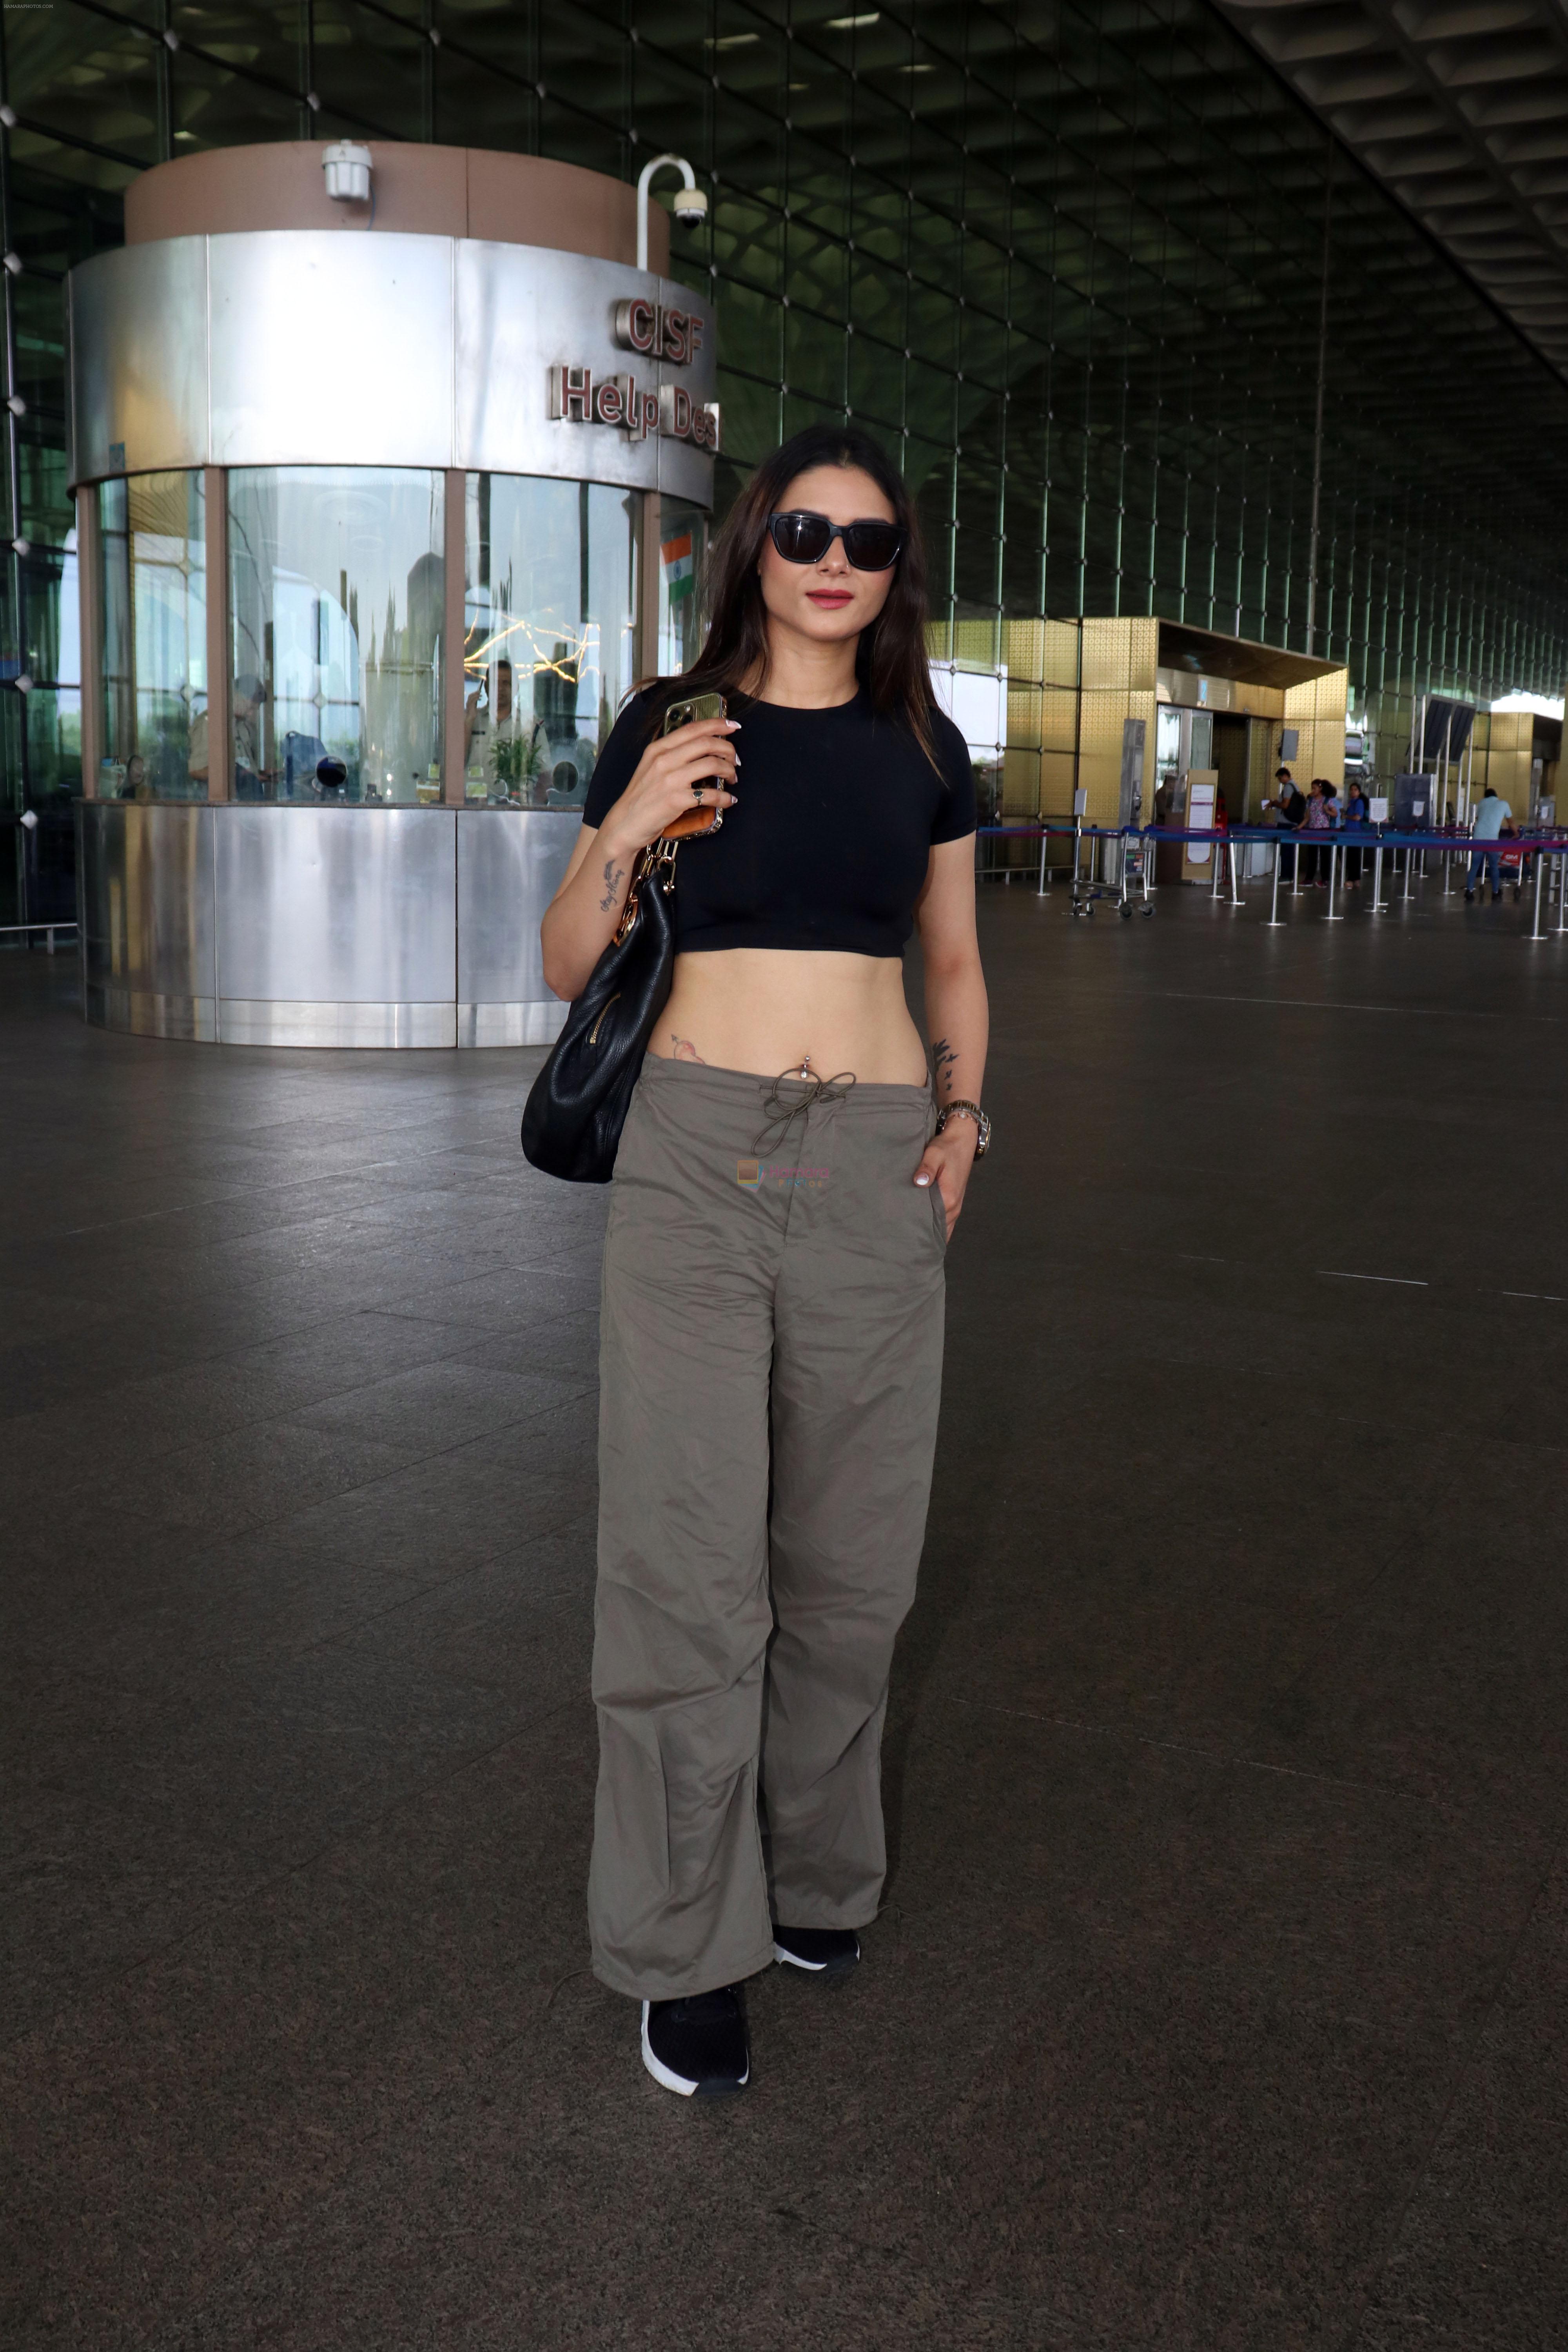 Sezal Sharma at the airport wearing black top and cargo pants